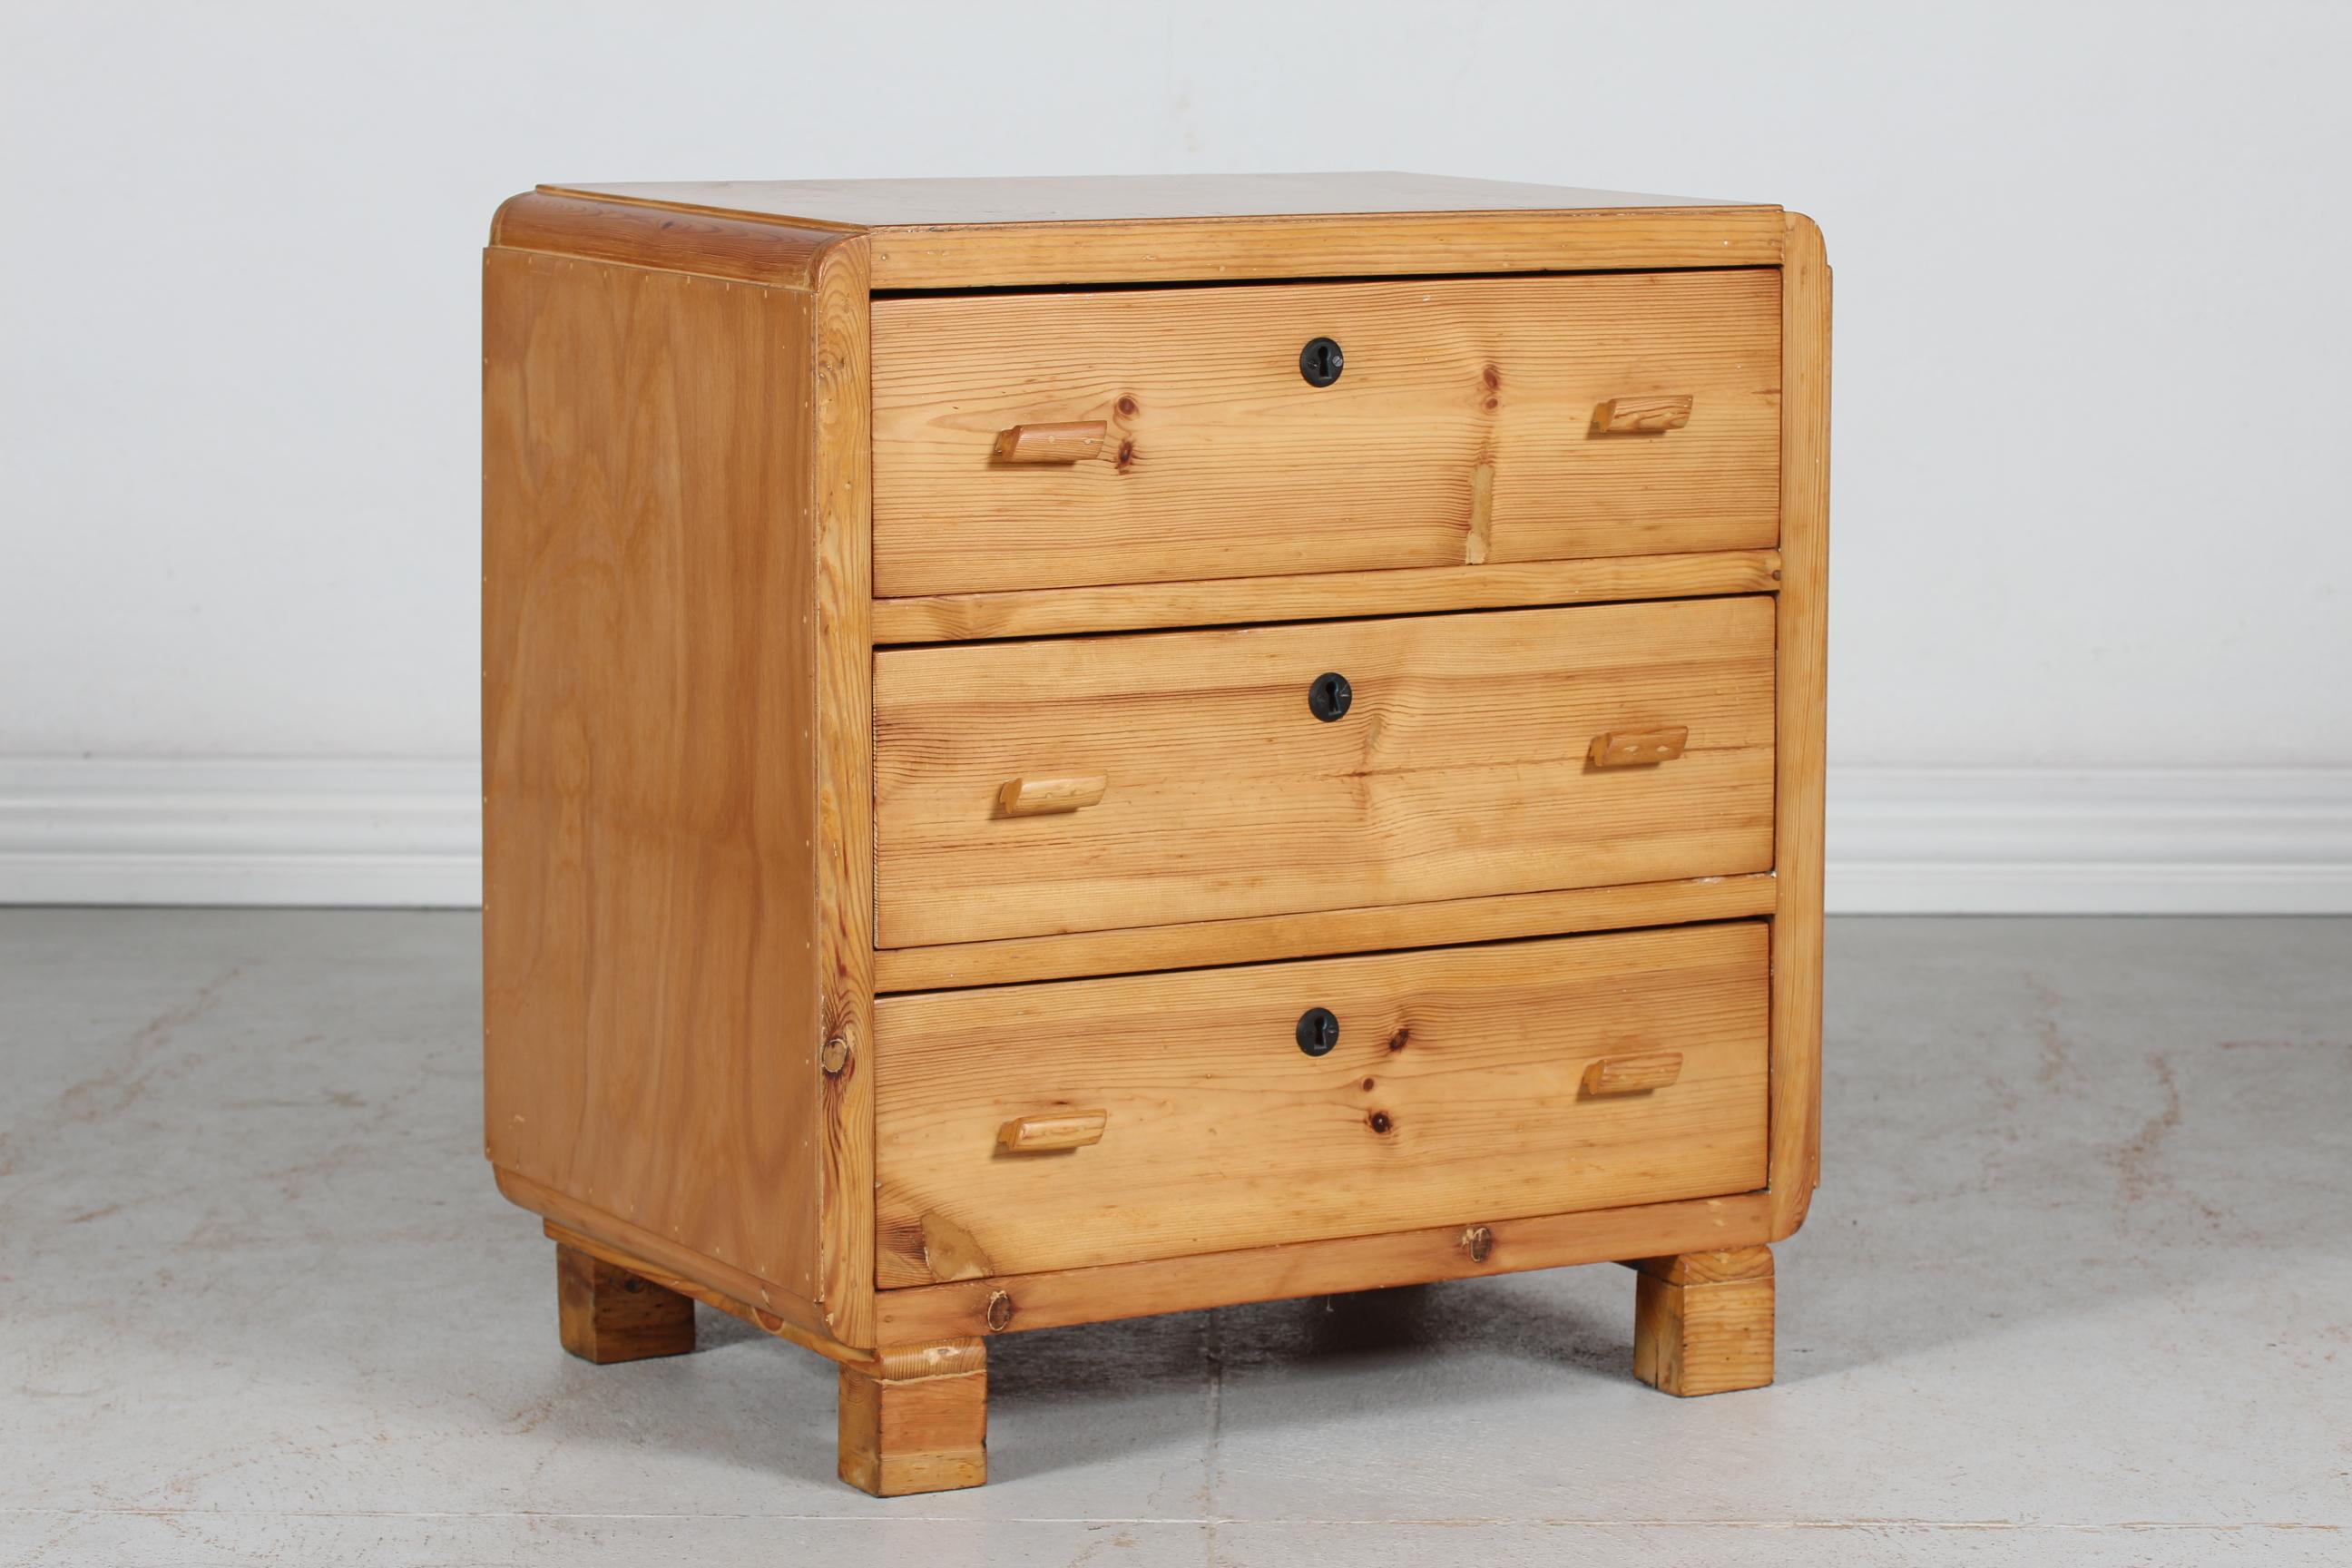 Danish Art Deco dresser with 3 drawers.
The frame and drawers are made of solid pine, the top and side are made of plywood.
Designed and made by a Danish furniture maker in the 1940s

The chest of drawers is really cozy with round corners and